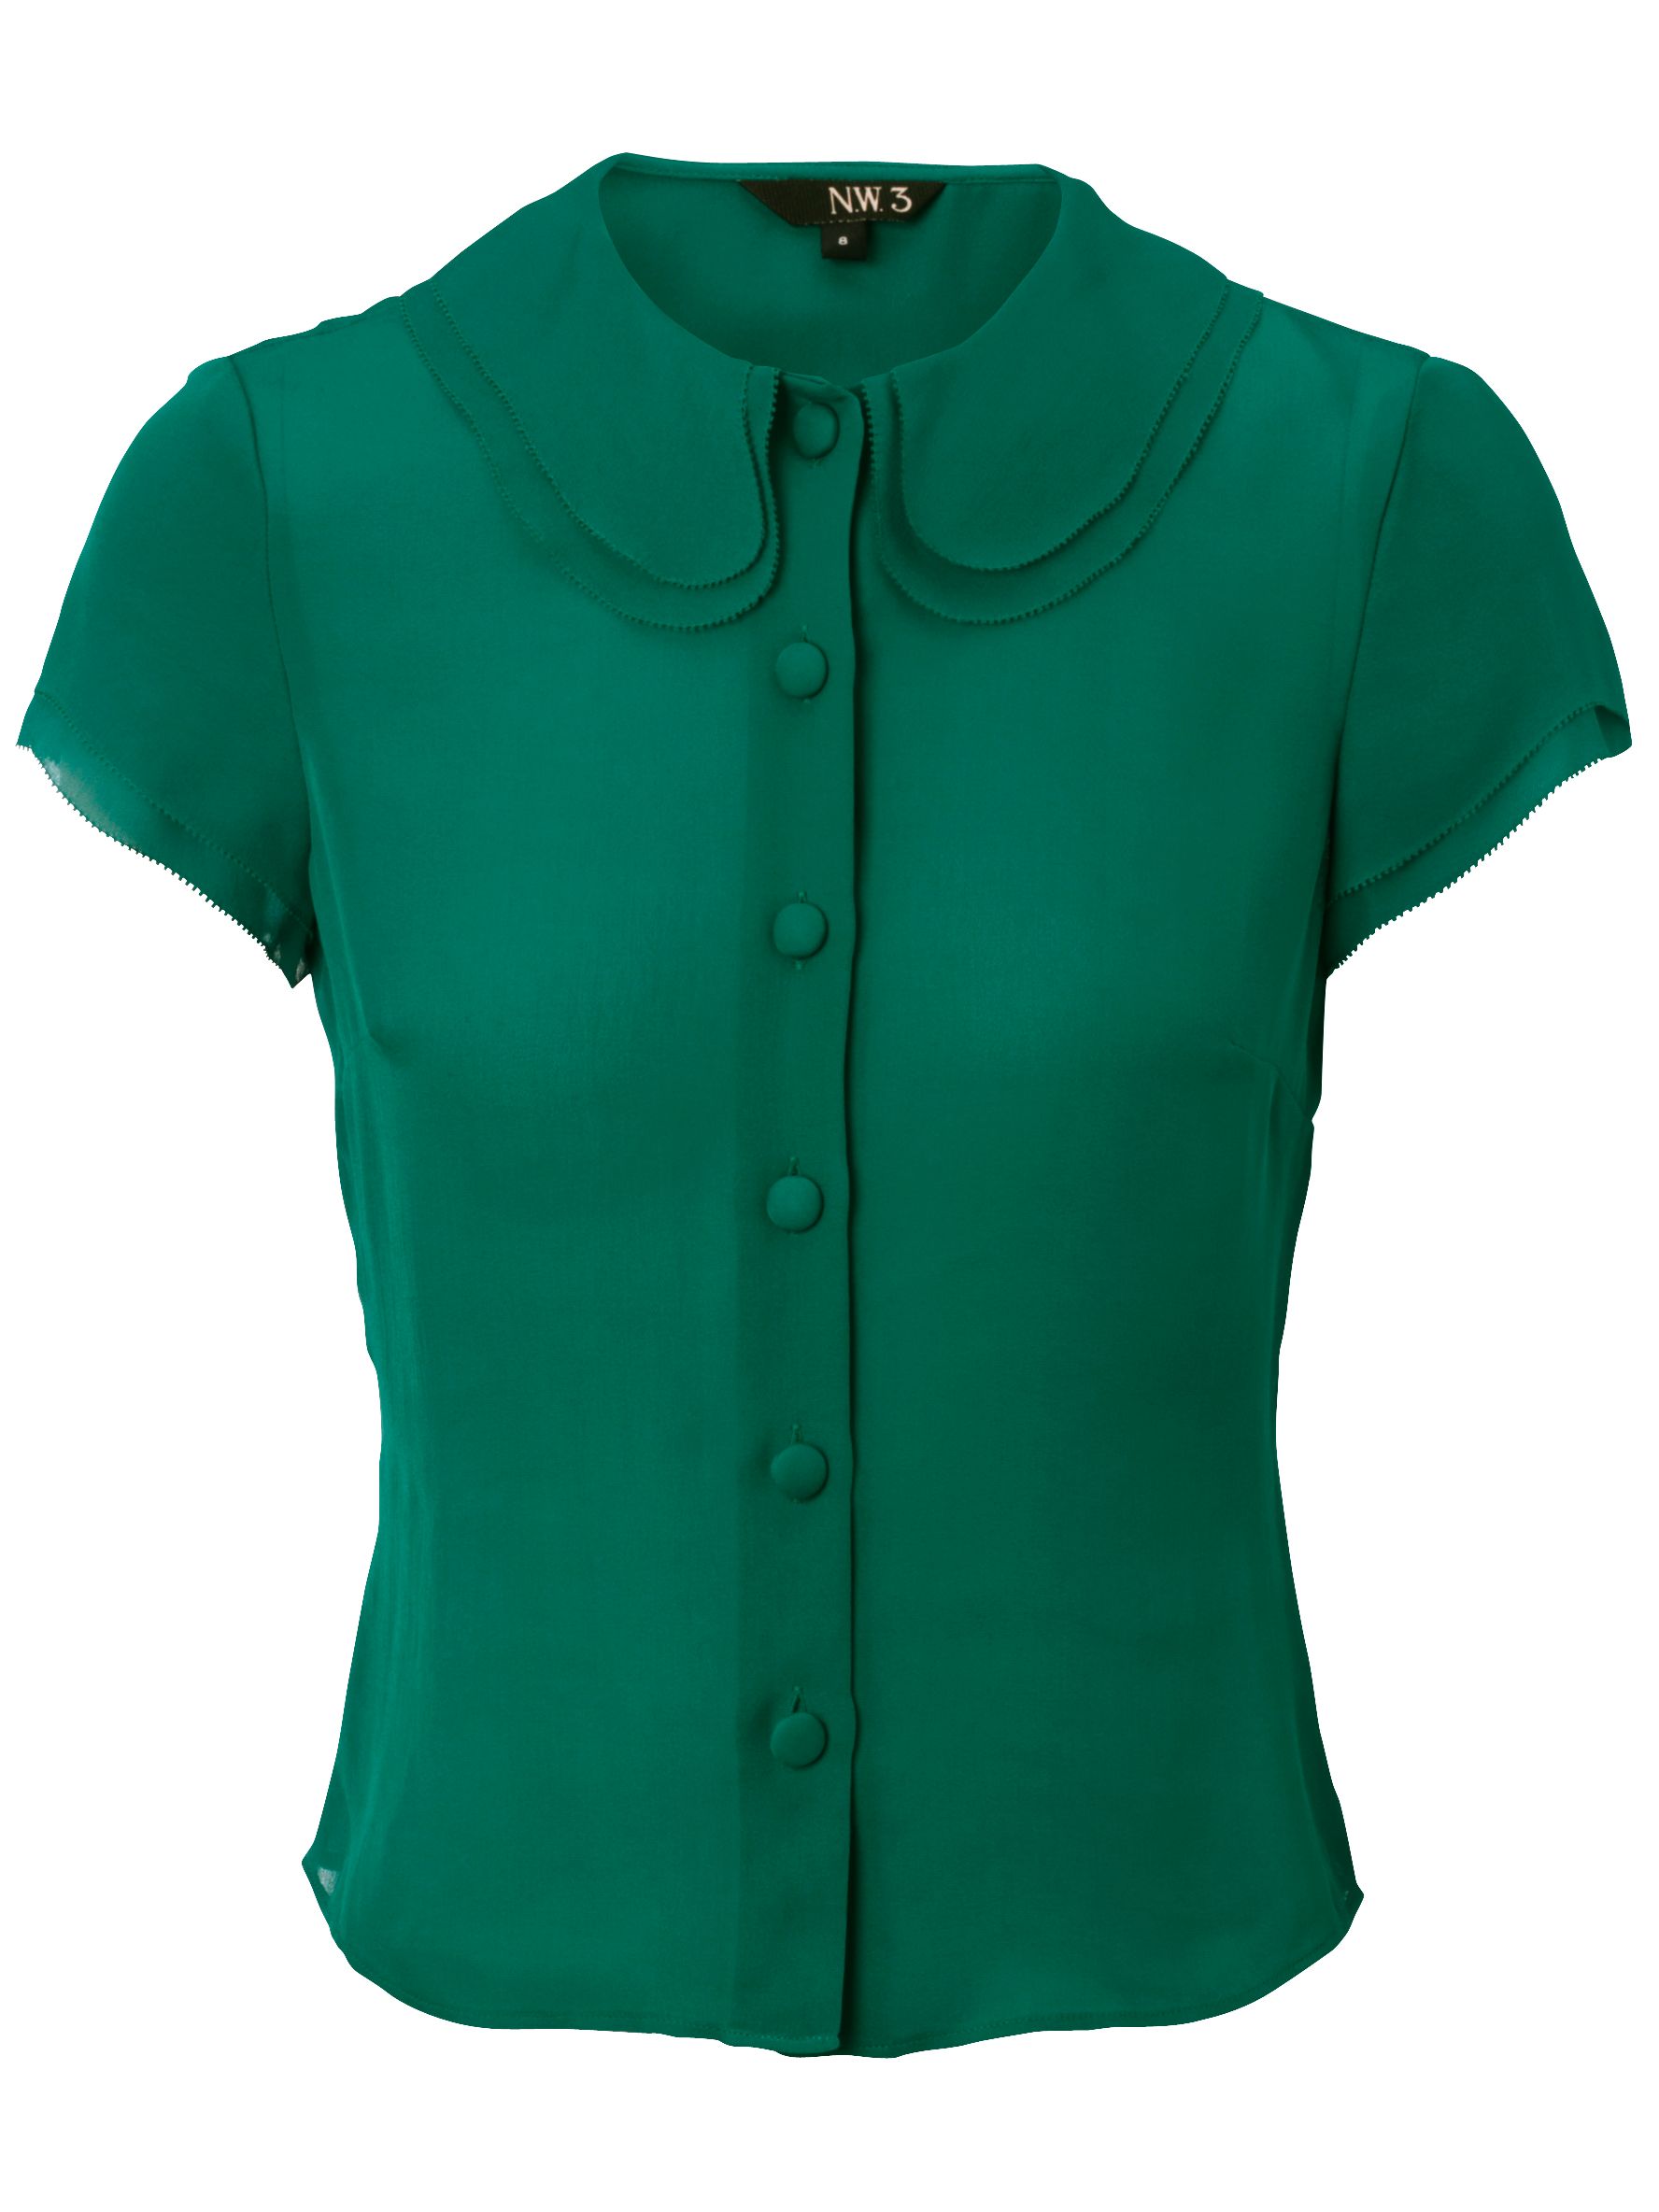 NW3 by Hobbs NW3 Double Collar Short Sleeve Blouse, Green